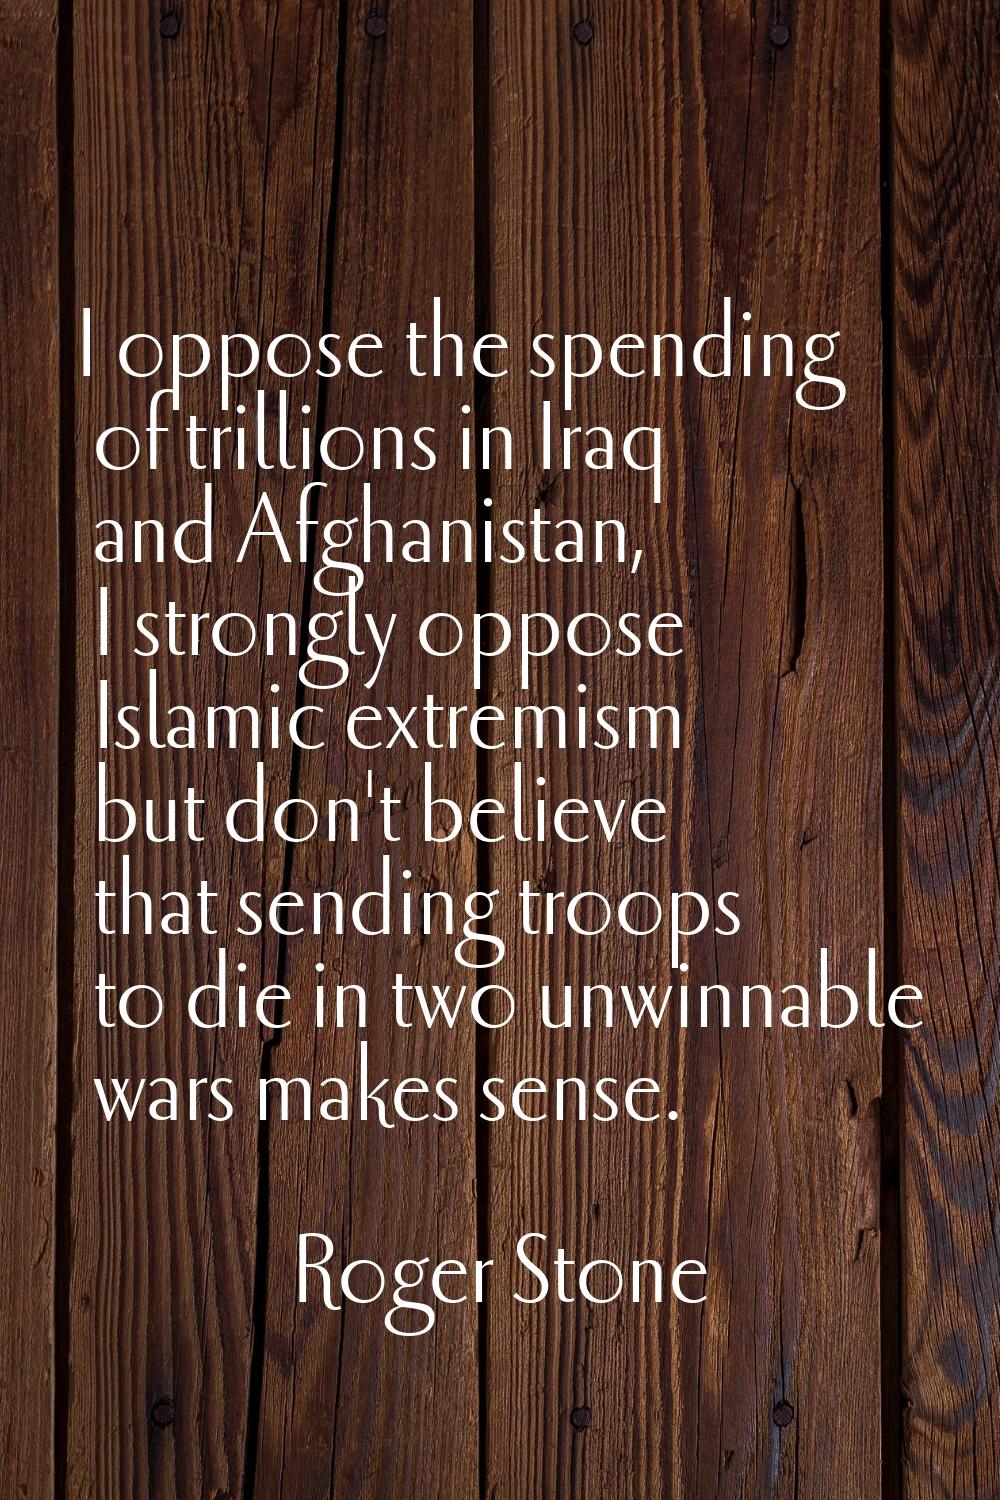 I oppose the spending of trillions in Iraq and Afghanistan, I strongly oppose Islamic extremism but